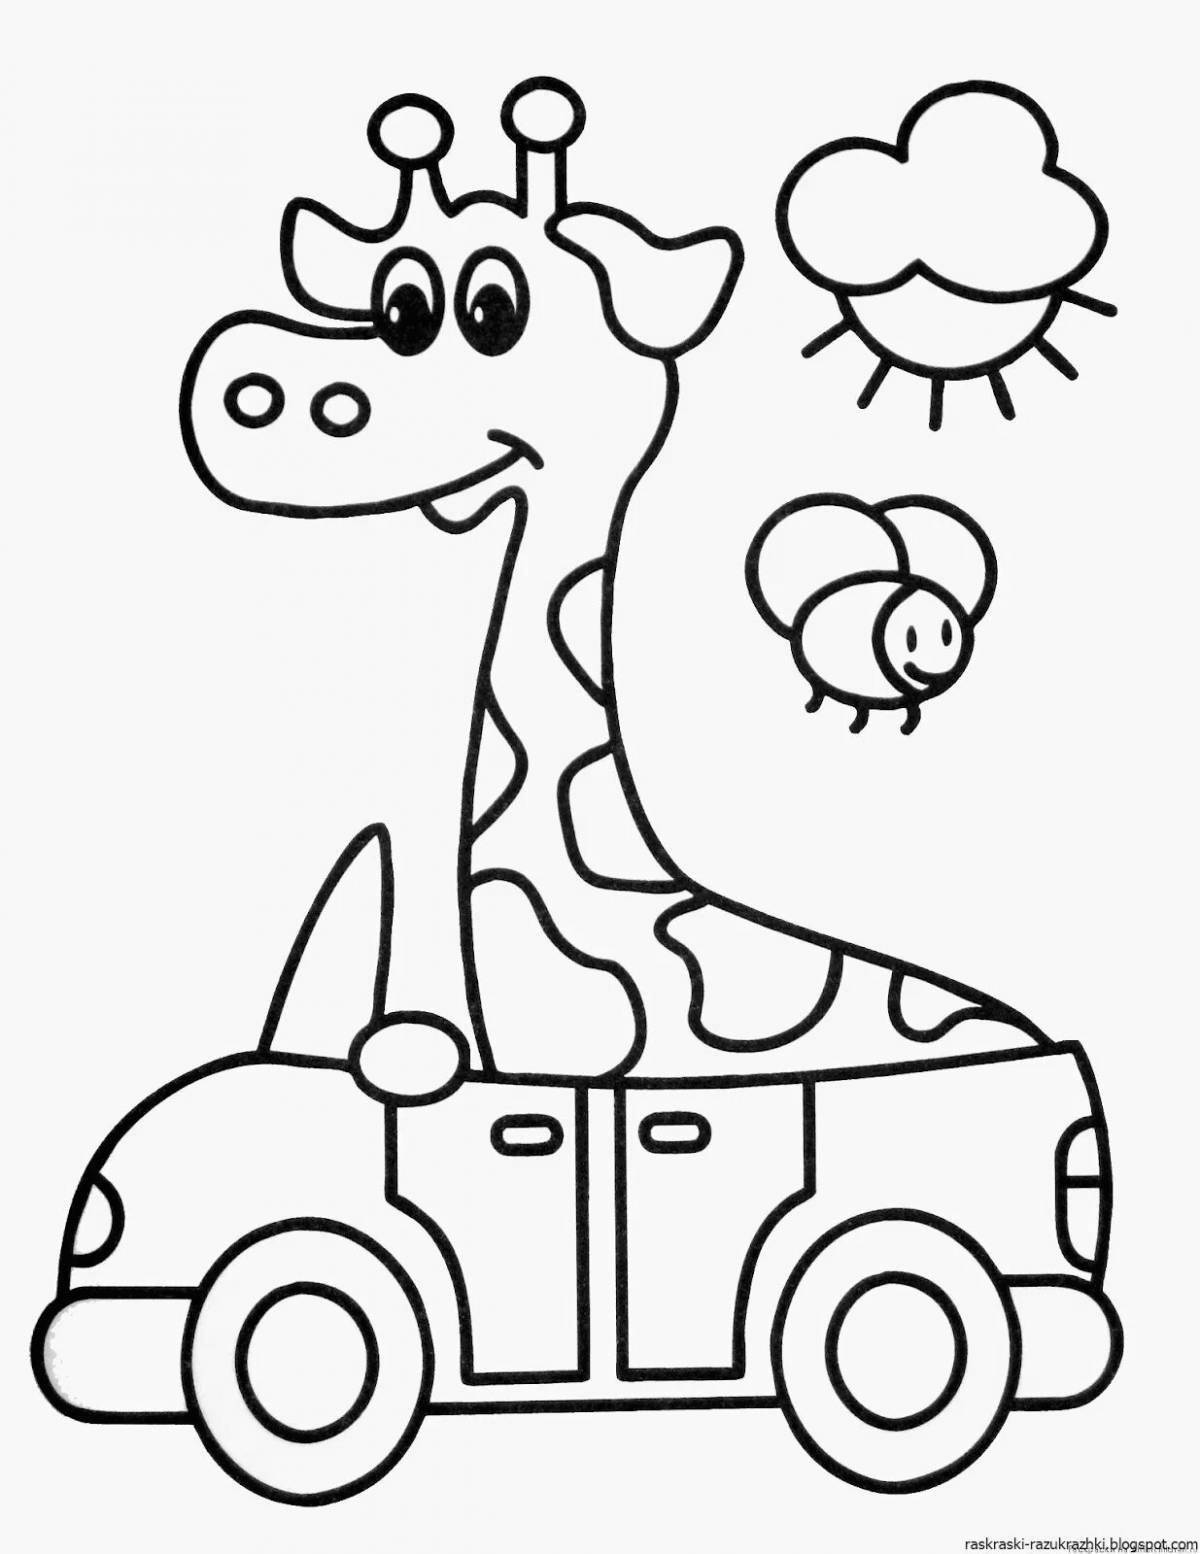 Colourful coloring pages for children 4 5